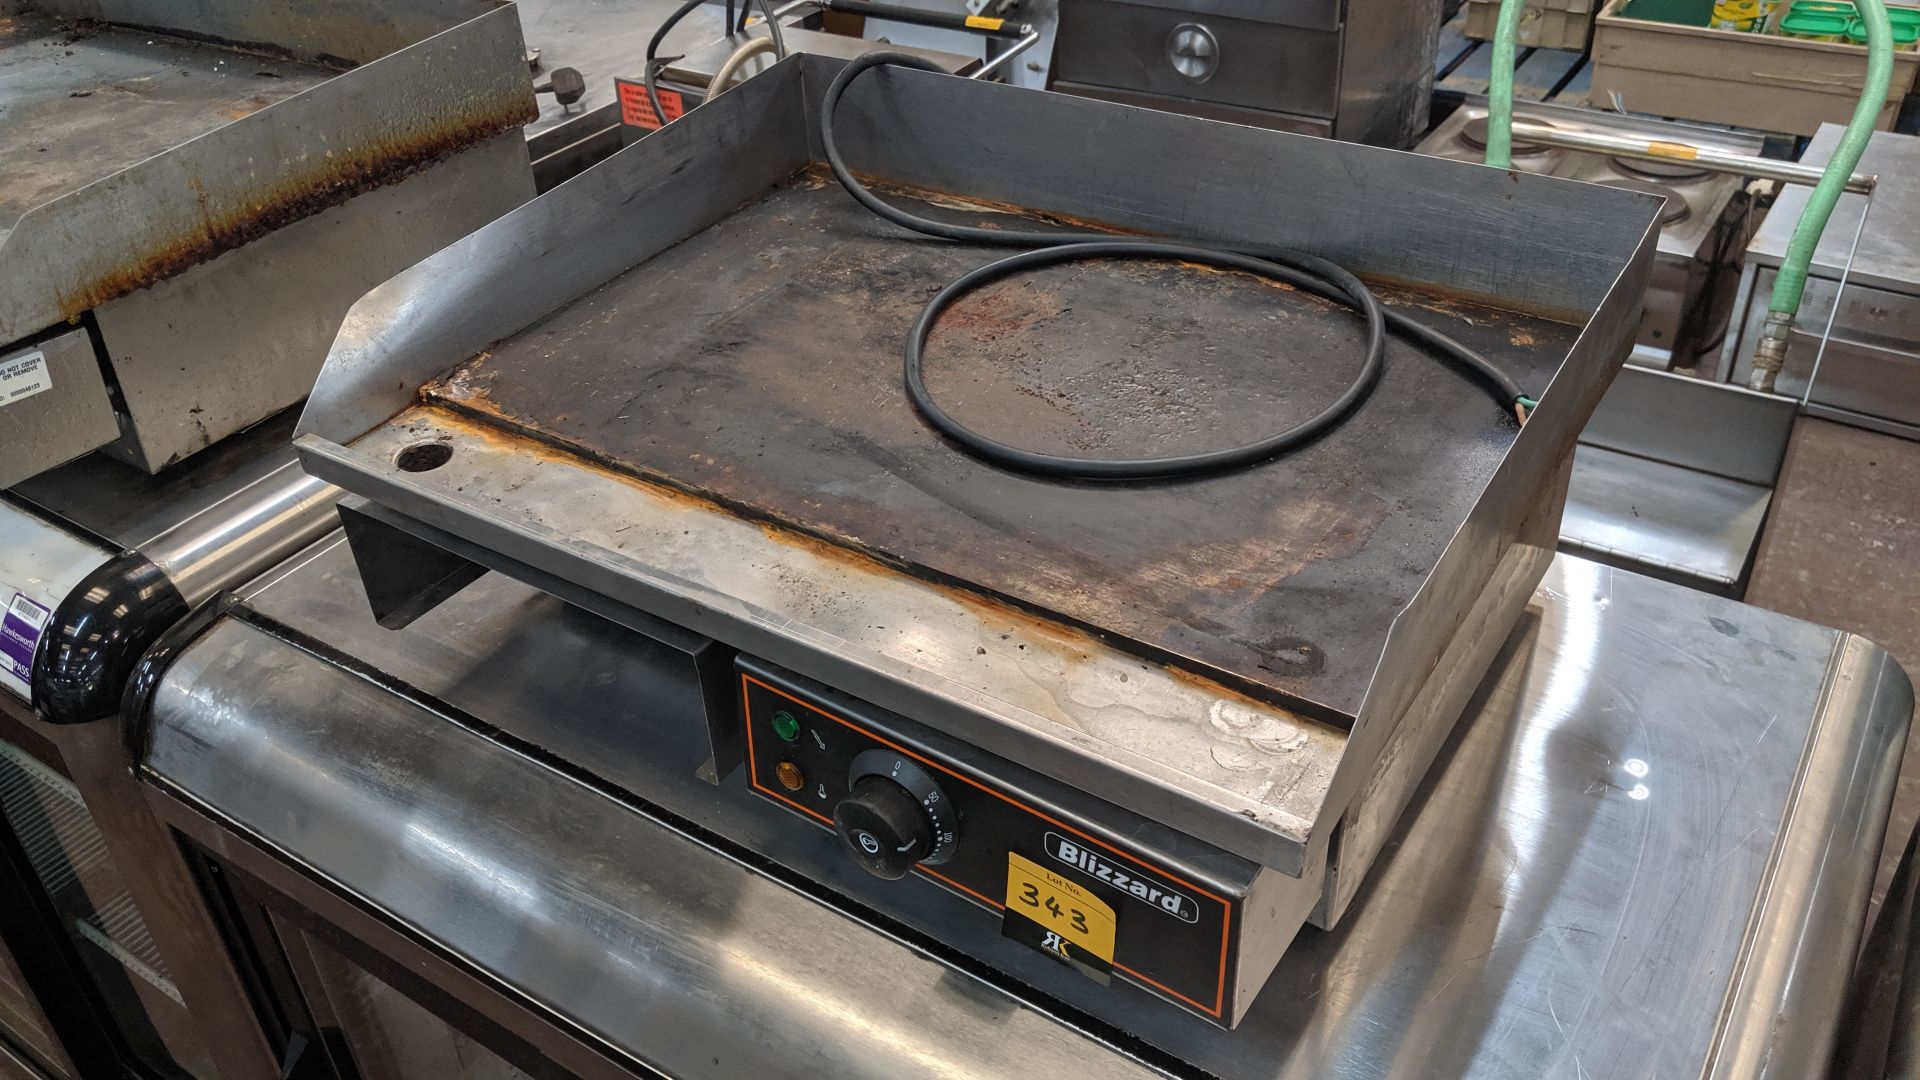 Blizzard benchtop plancha/griddle unit IMPORTANT: Please remember goods successfully bid upon must - Image 3 of 4